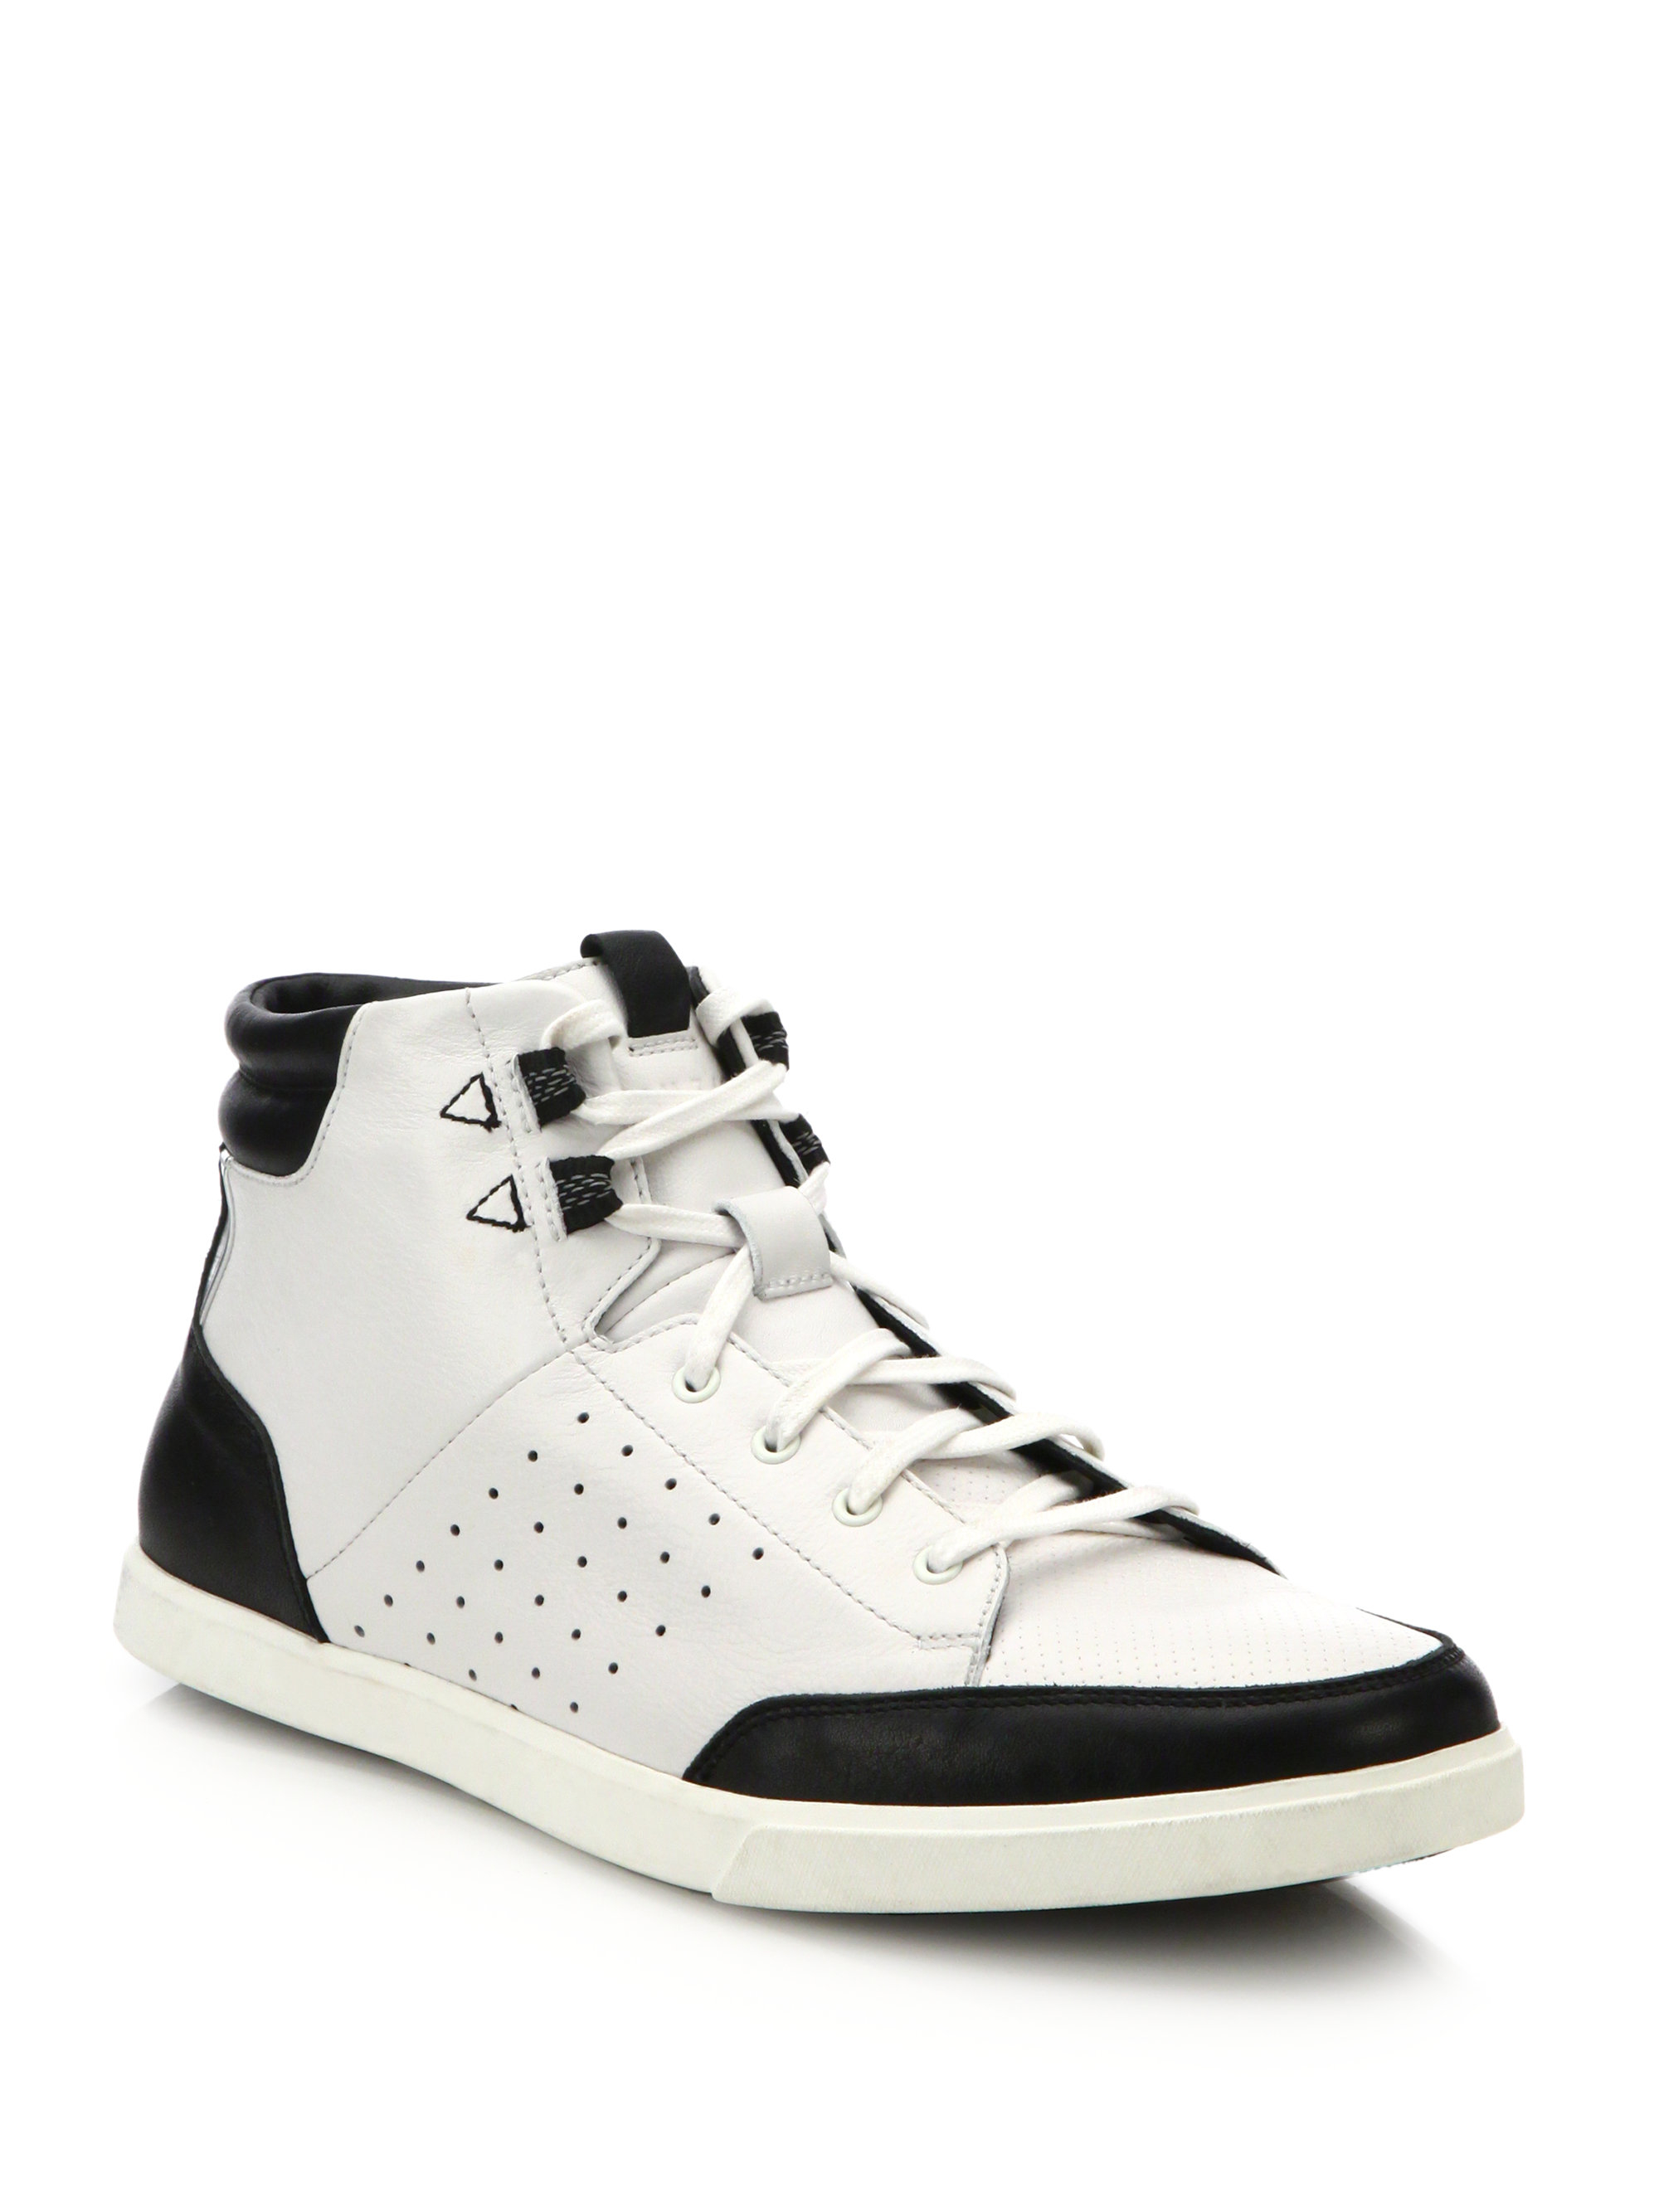 saks fifth avenue gucci sneakers